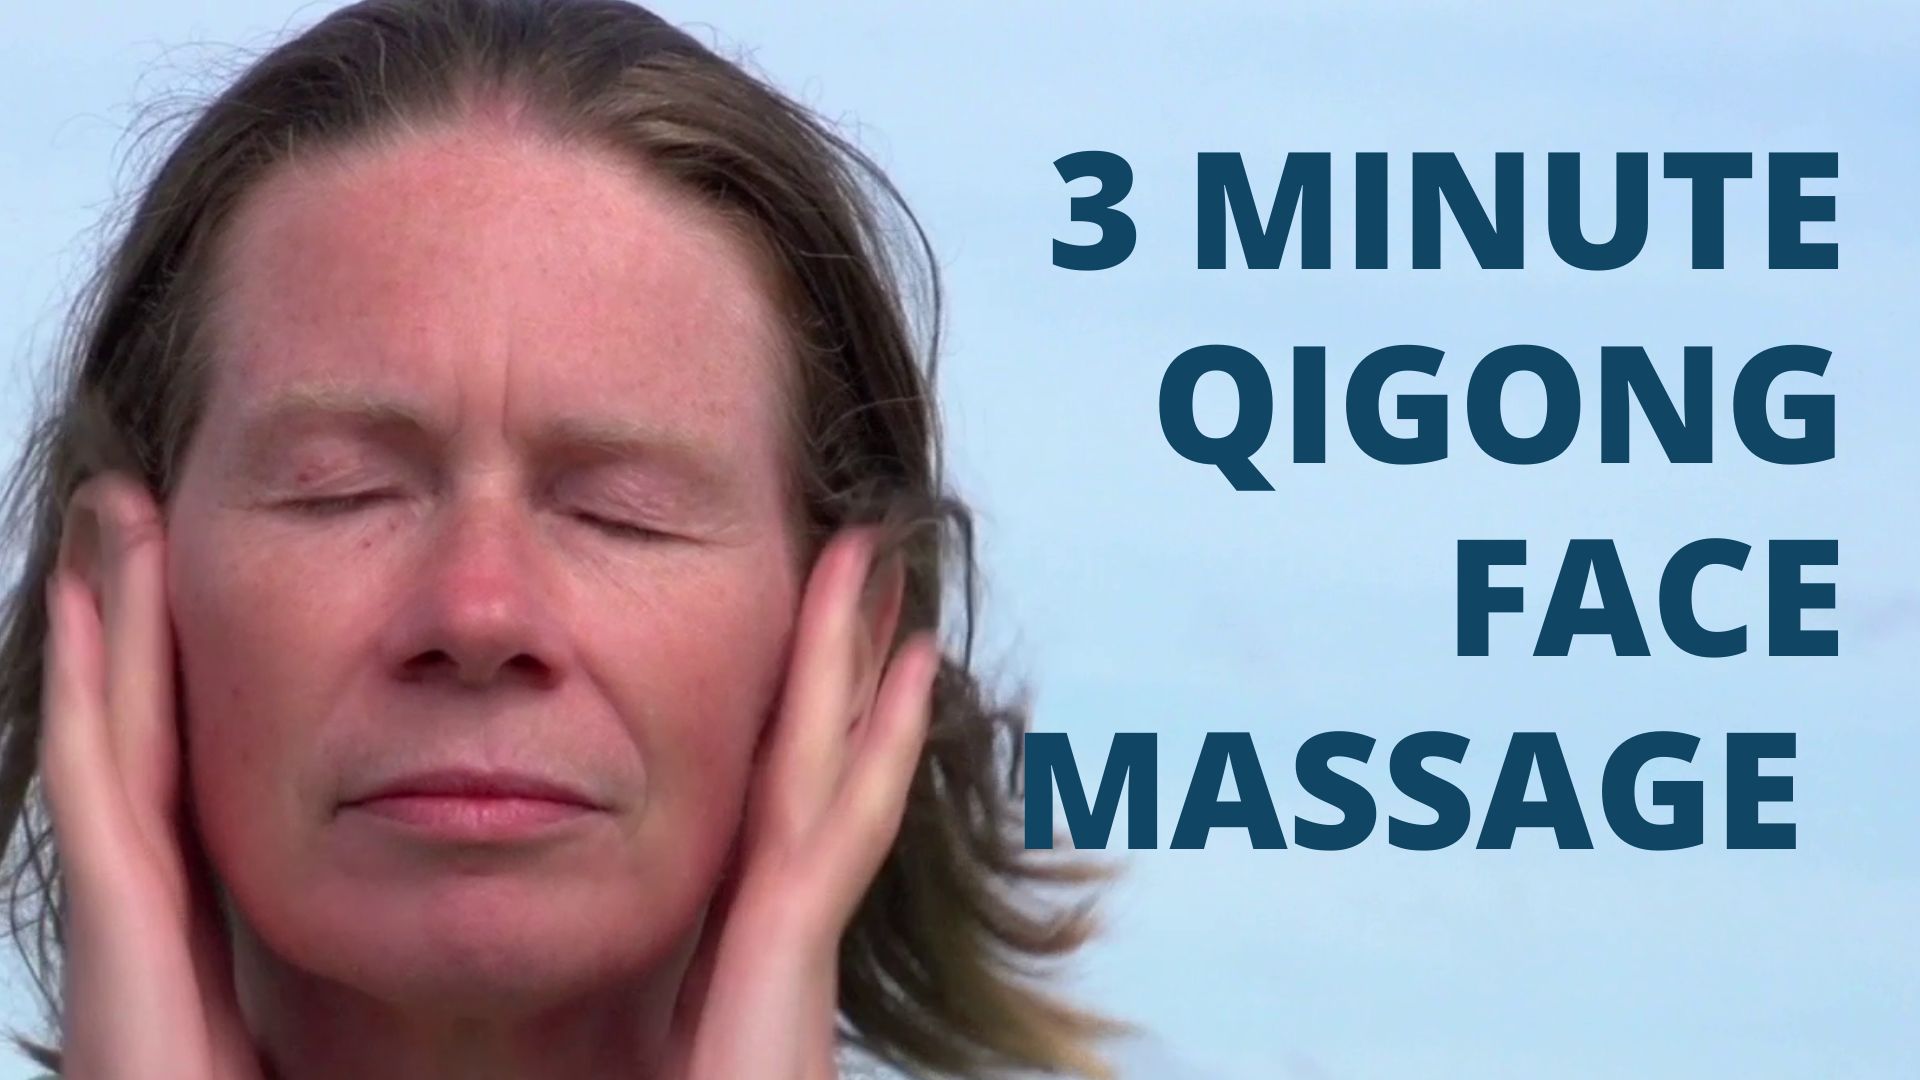 3 Minute Qigong Face Massage To Relieve Tiredness